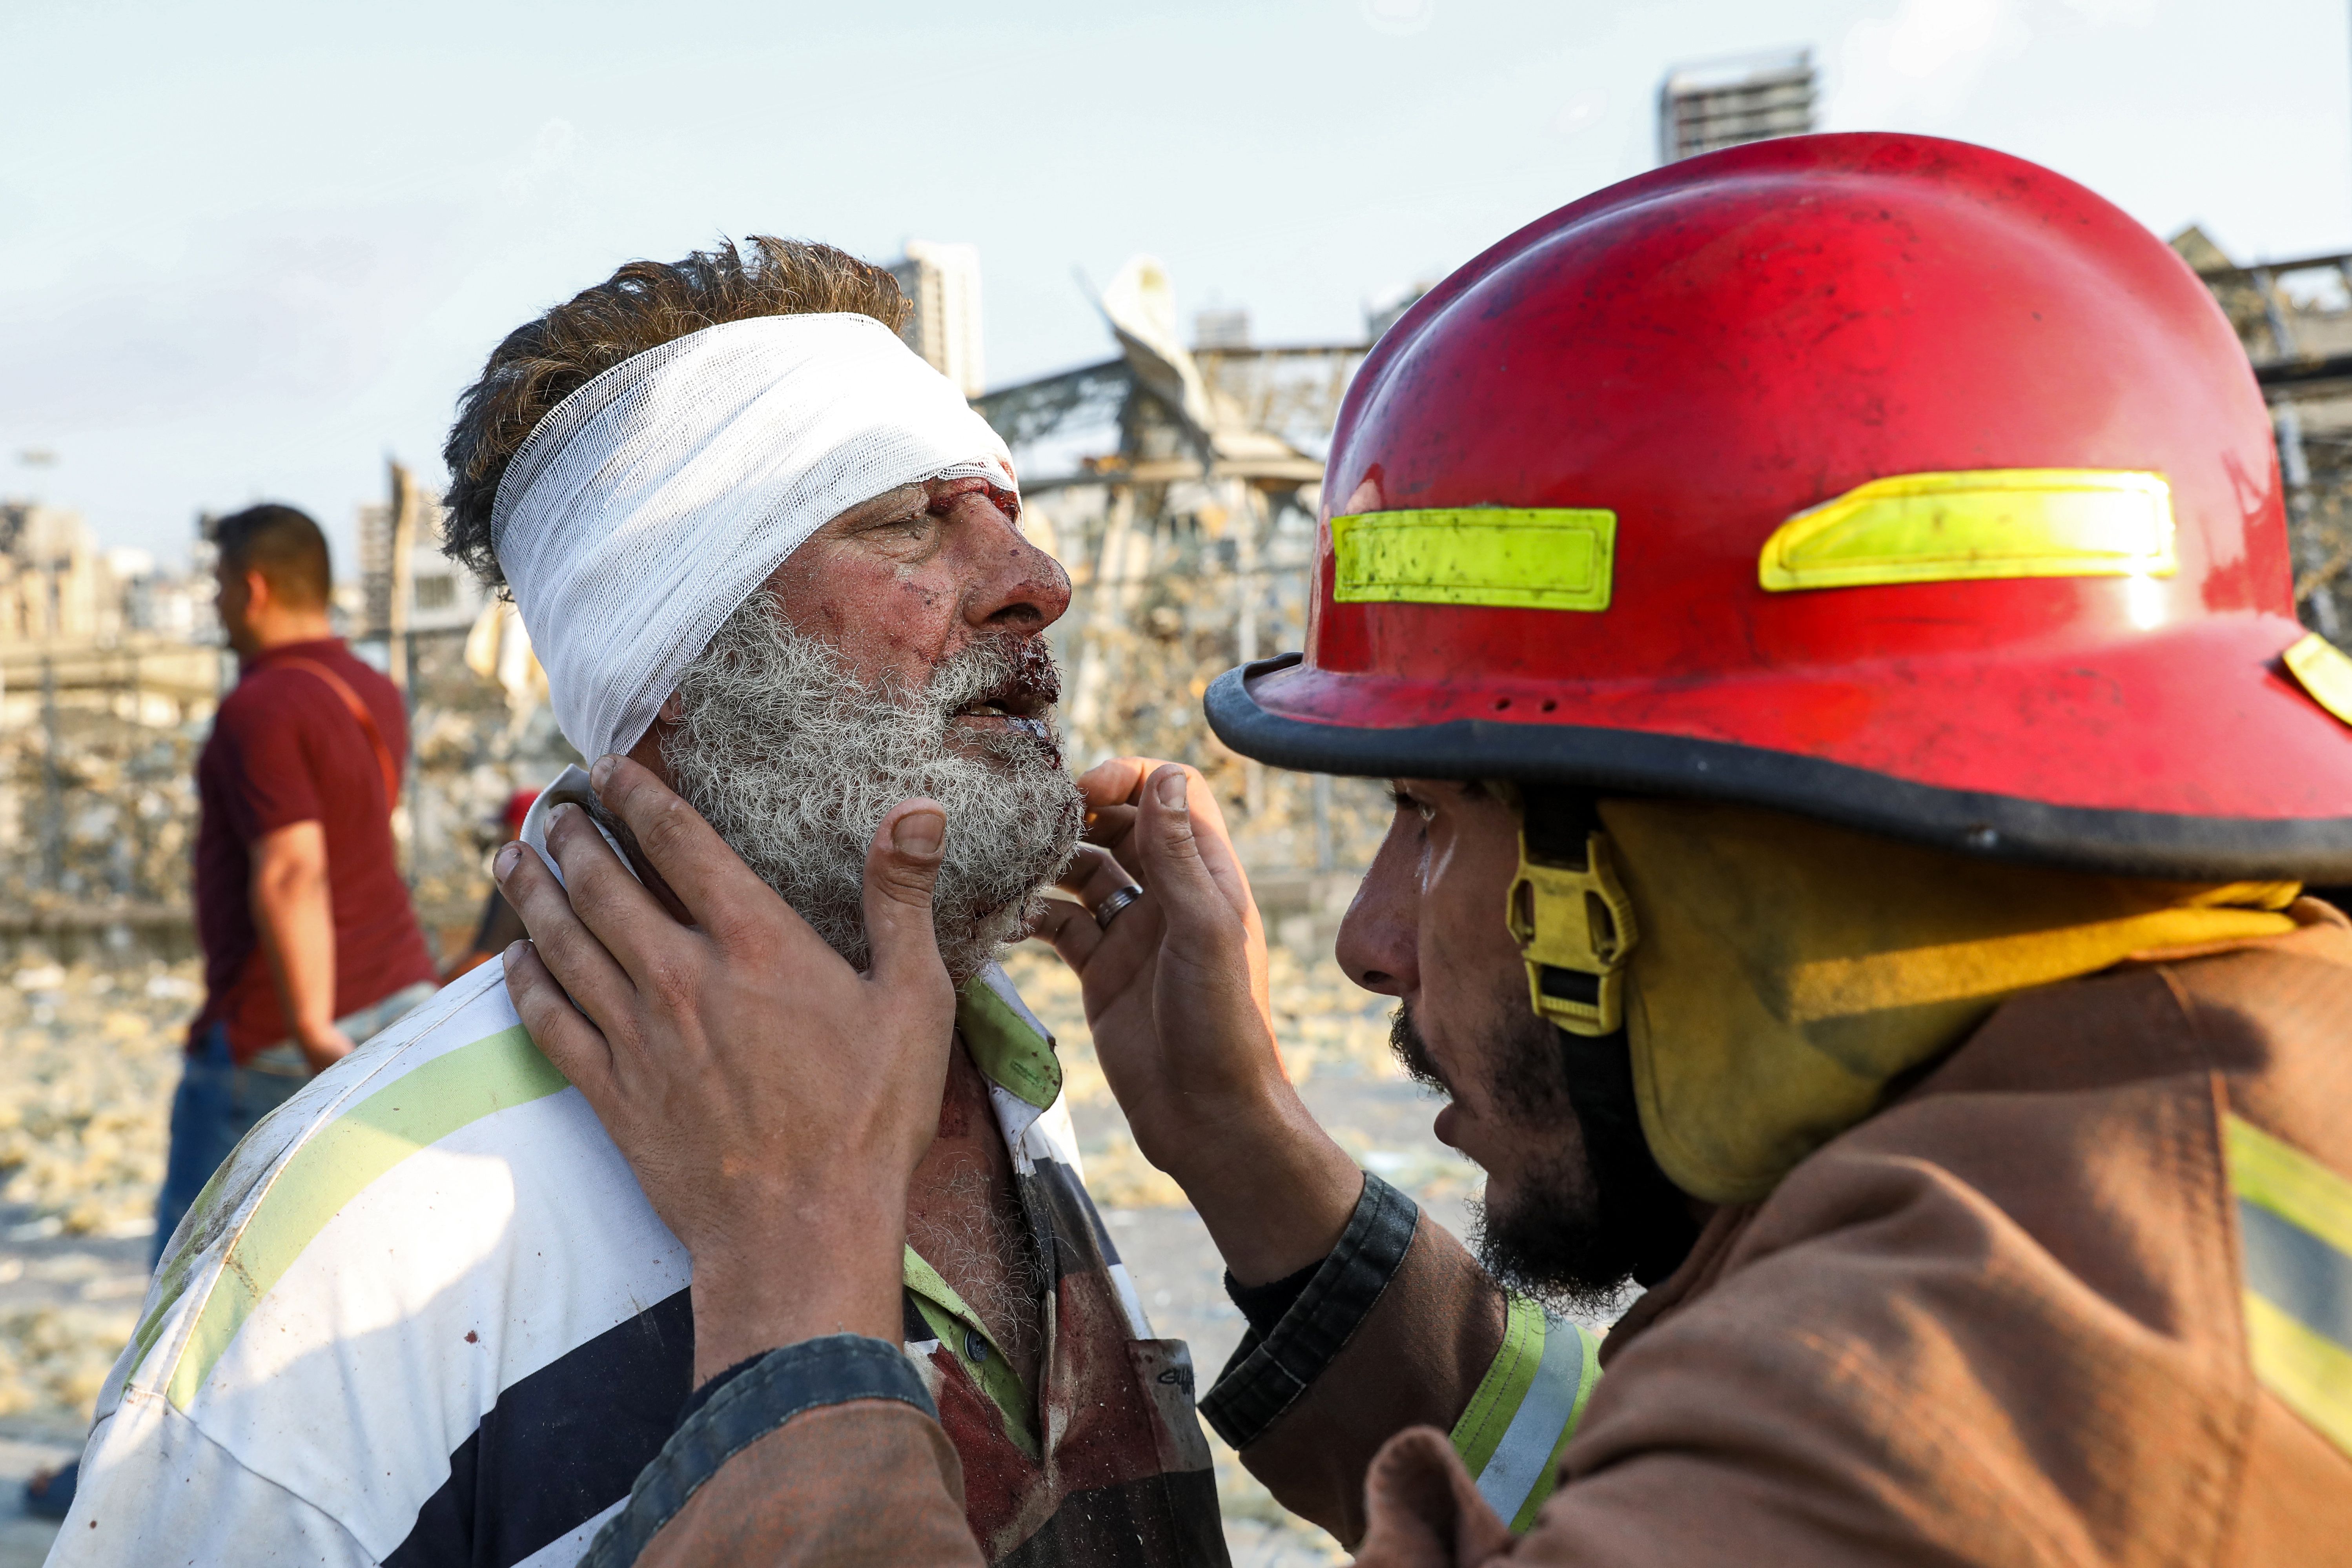 A wounded man is checked by a fireman near the scene of an explosion in Beirut on August 4, 2020. - A large explosion rocked the Lebanese capital Beirut on August 4, an AFP correspondent said. The blast, which rattled entire buildings and broke glass, was felt in several parts of the city. (Photo by Anwar AMRO / AFP) (Photo by ANWAR AMRO/AFP via Getty Images)